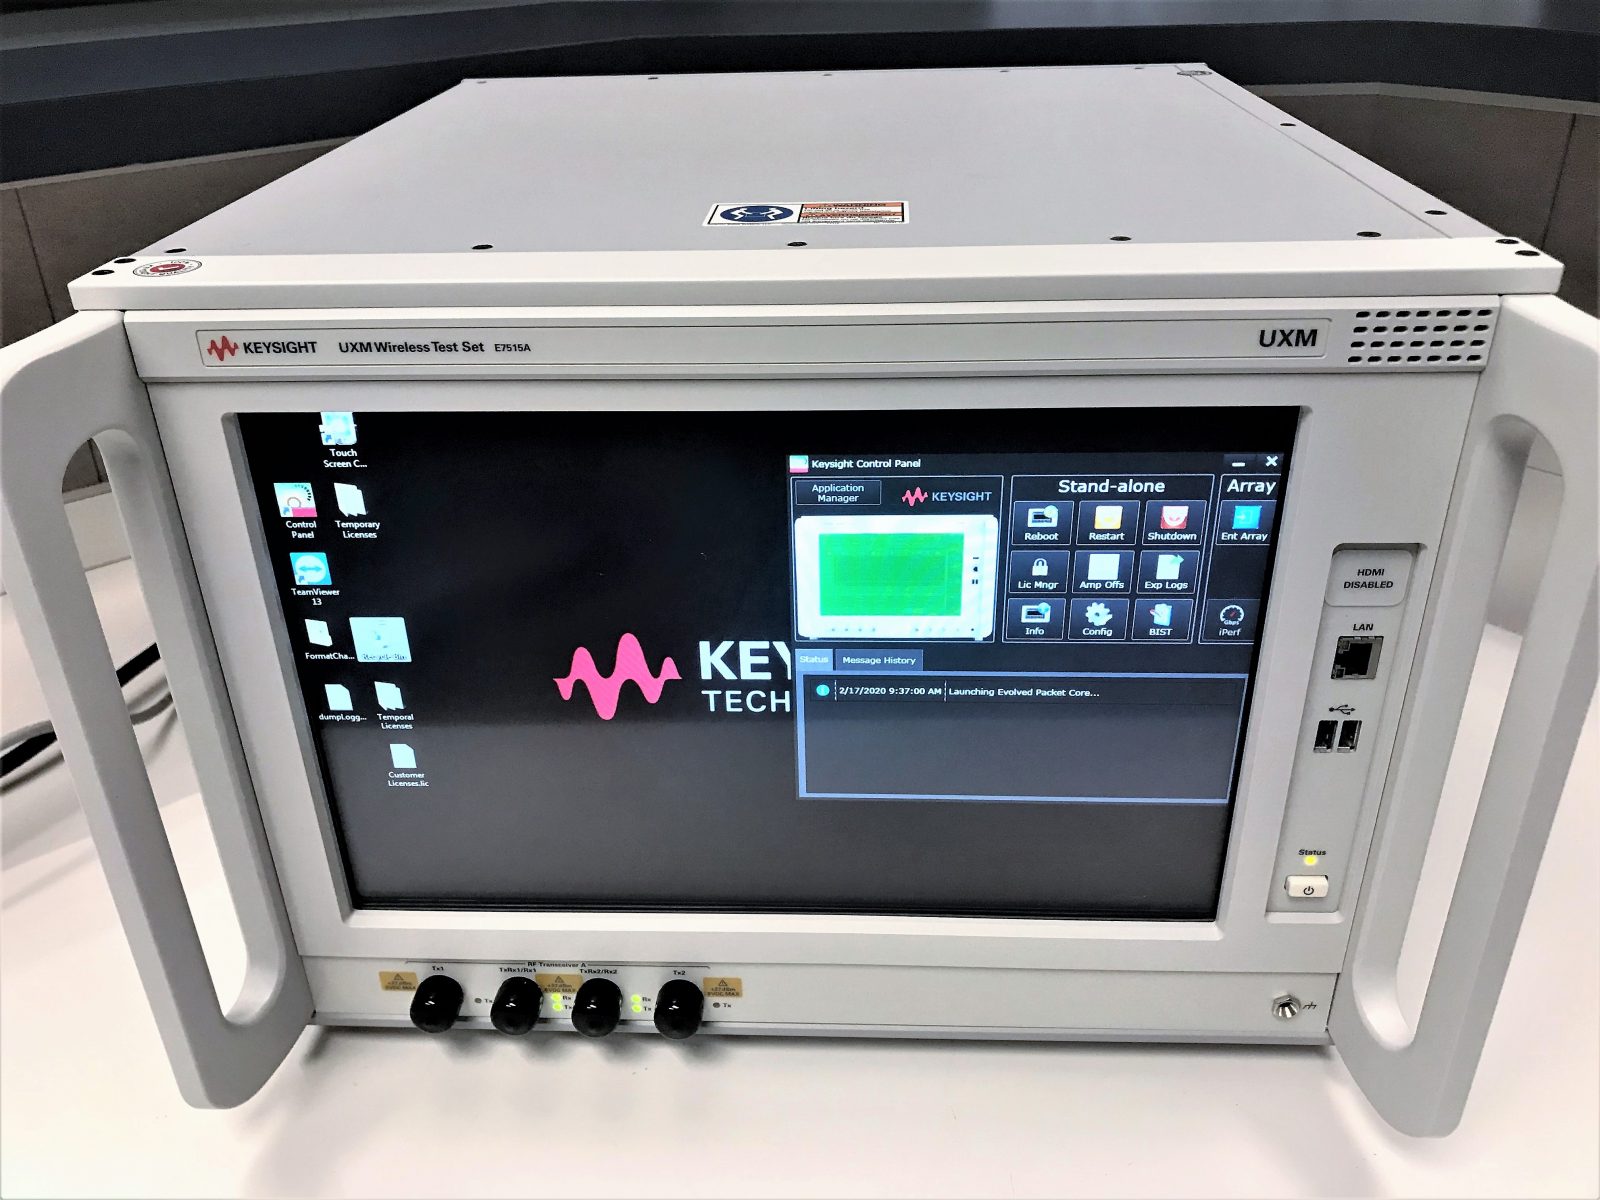 Keysight E7515A - 504 UXM Wireless Test Set / 300 MHz to 3.8 GHz, with  Options 504, 1CM, 1FP-FFD, 1FP-TDD, GFP-0M1, GFP-0NB and MEU